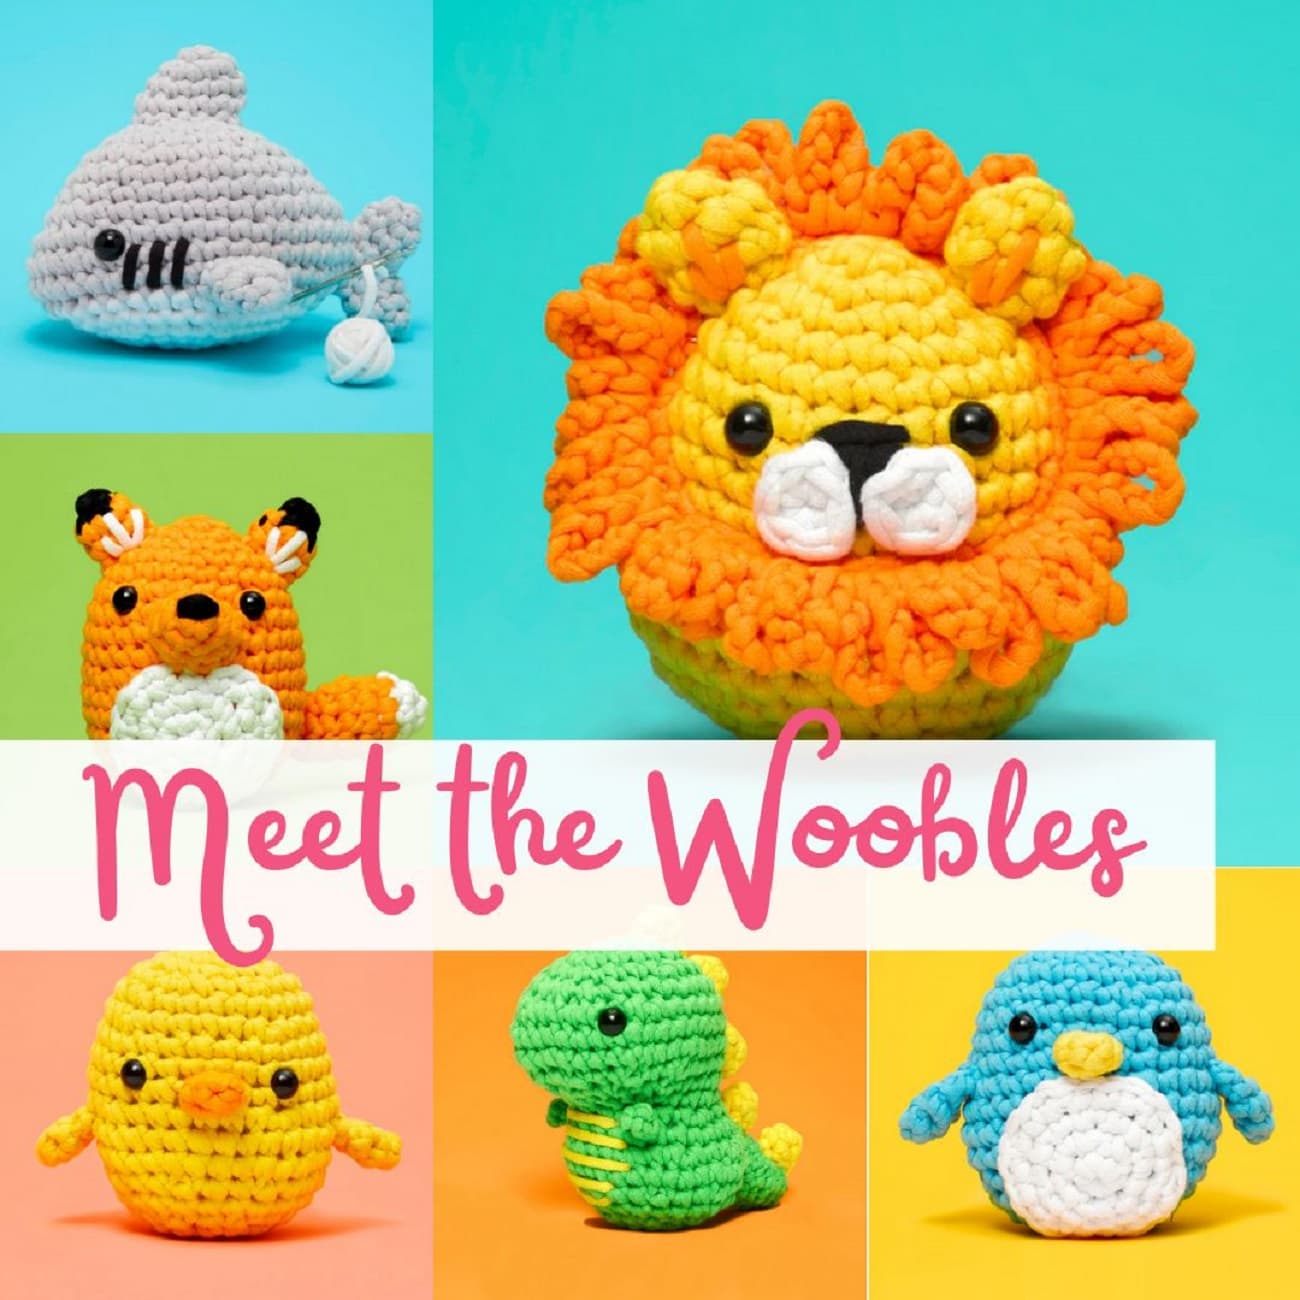 10 Reasons Why The Woobles Crochet Kits Are So Awesome - Stardust Gold  Crochet